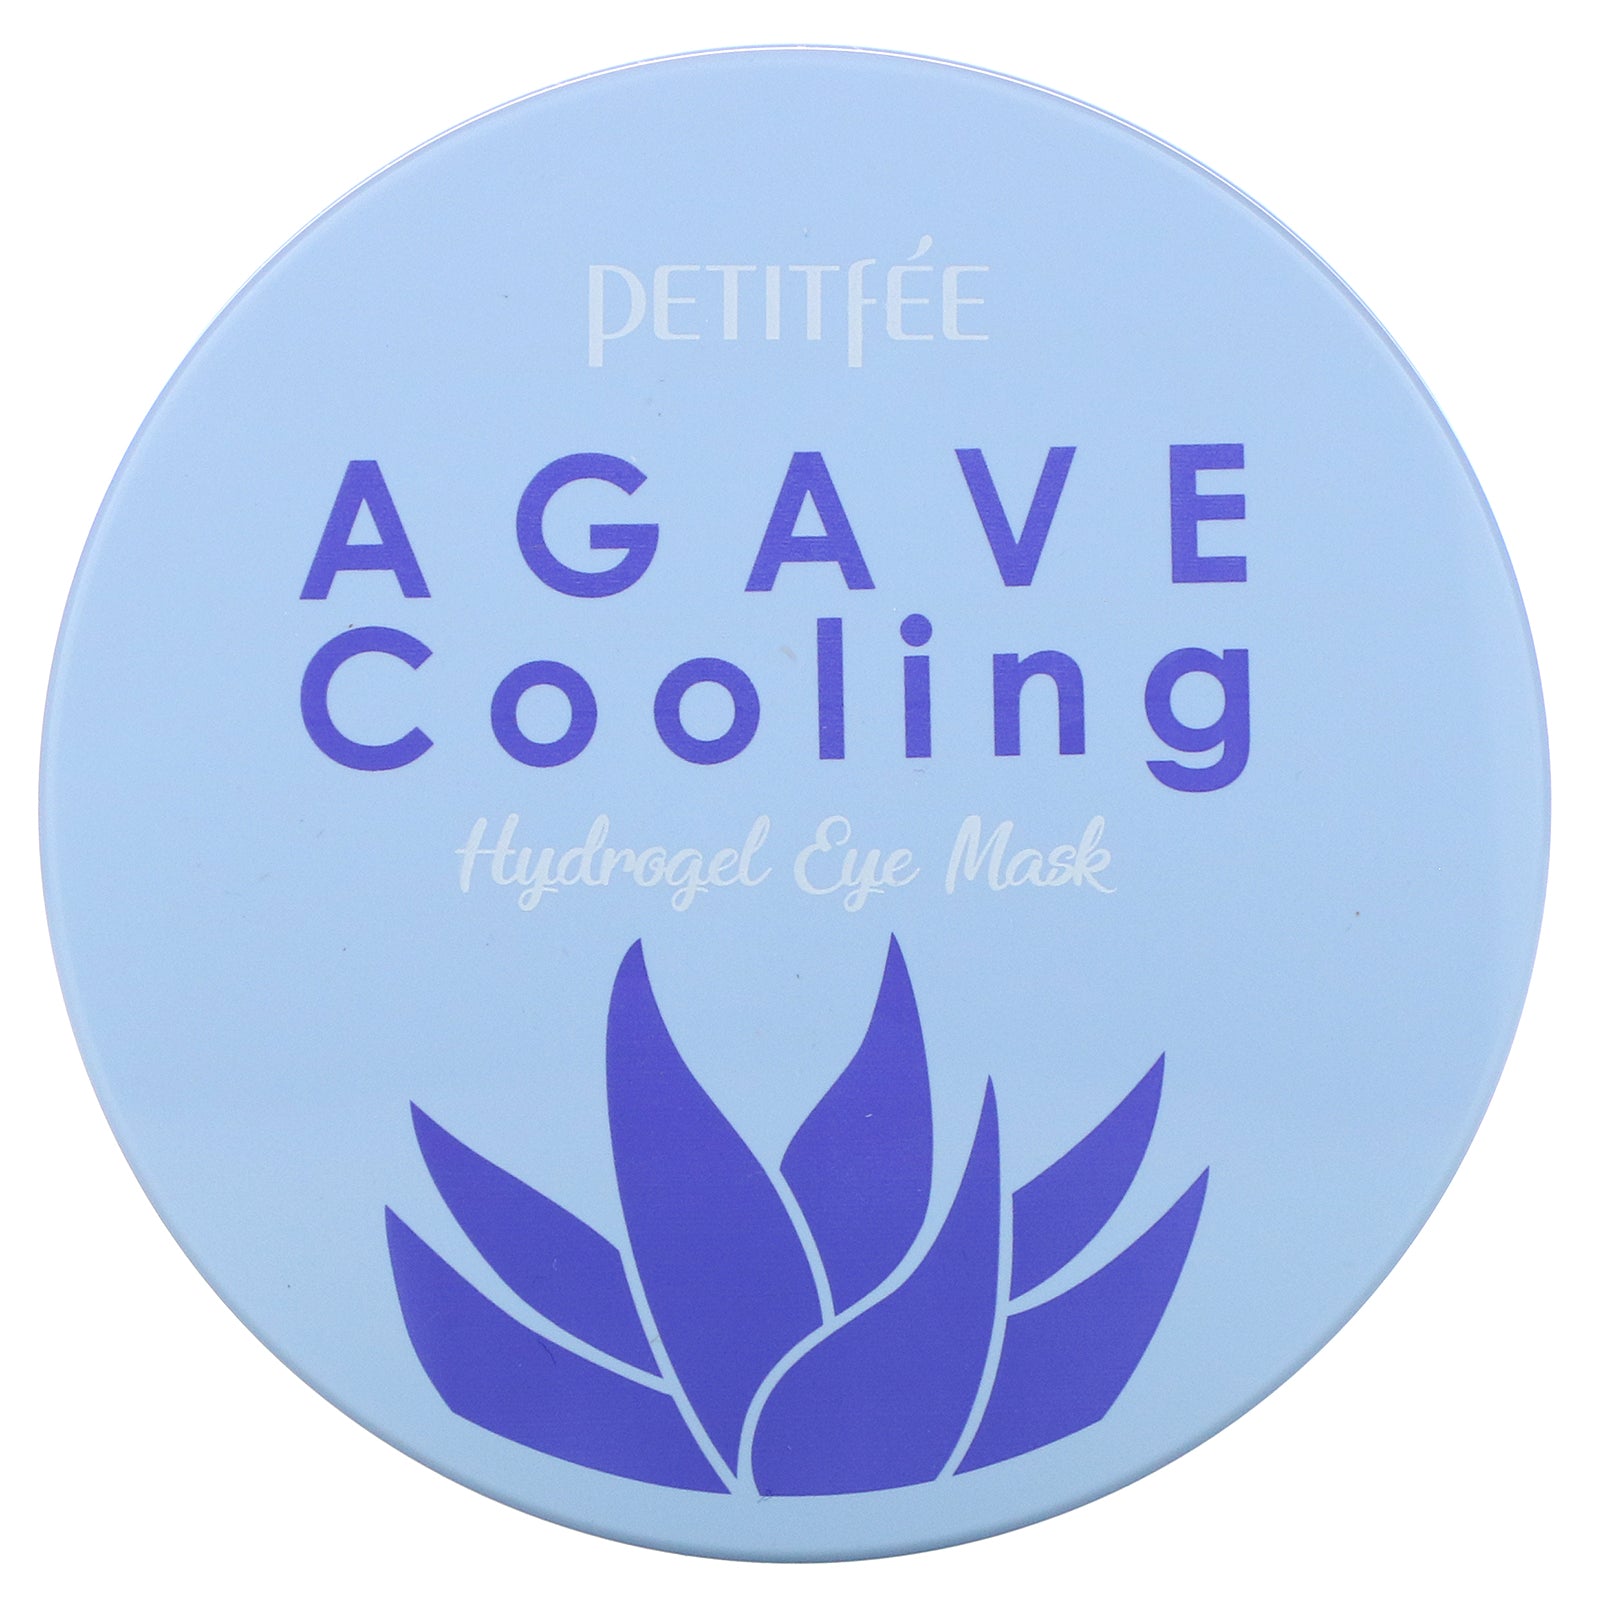 Petitfee, Agave Cooling, Hydrogel Eye Mask, 60 Pieces